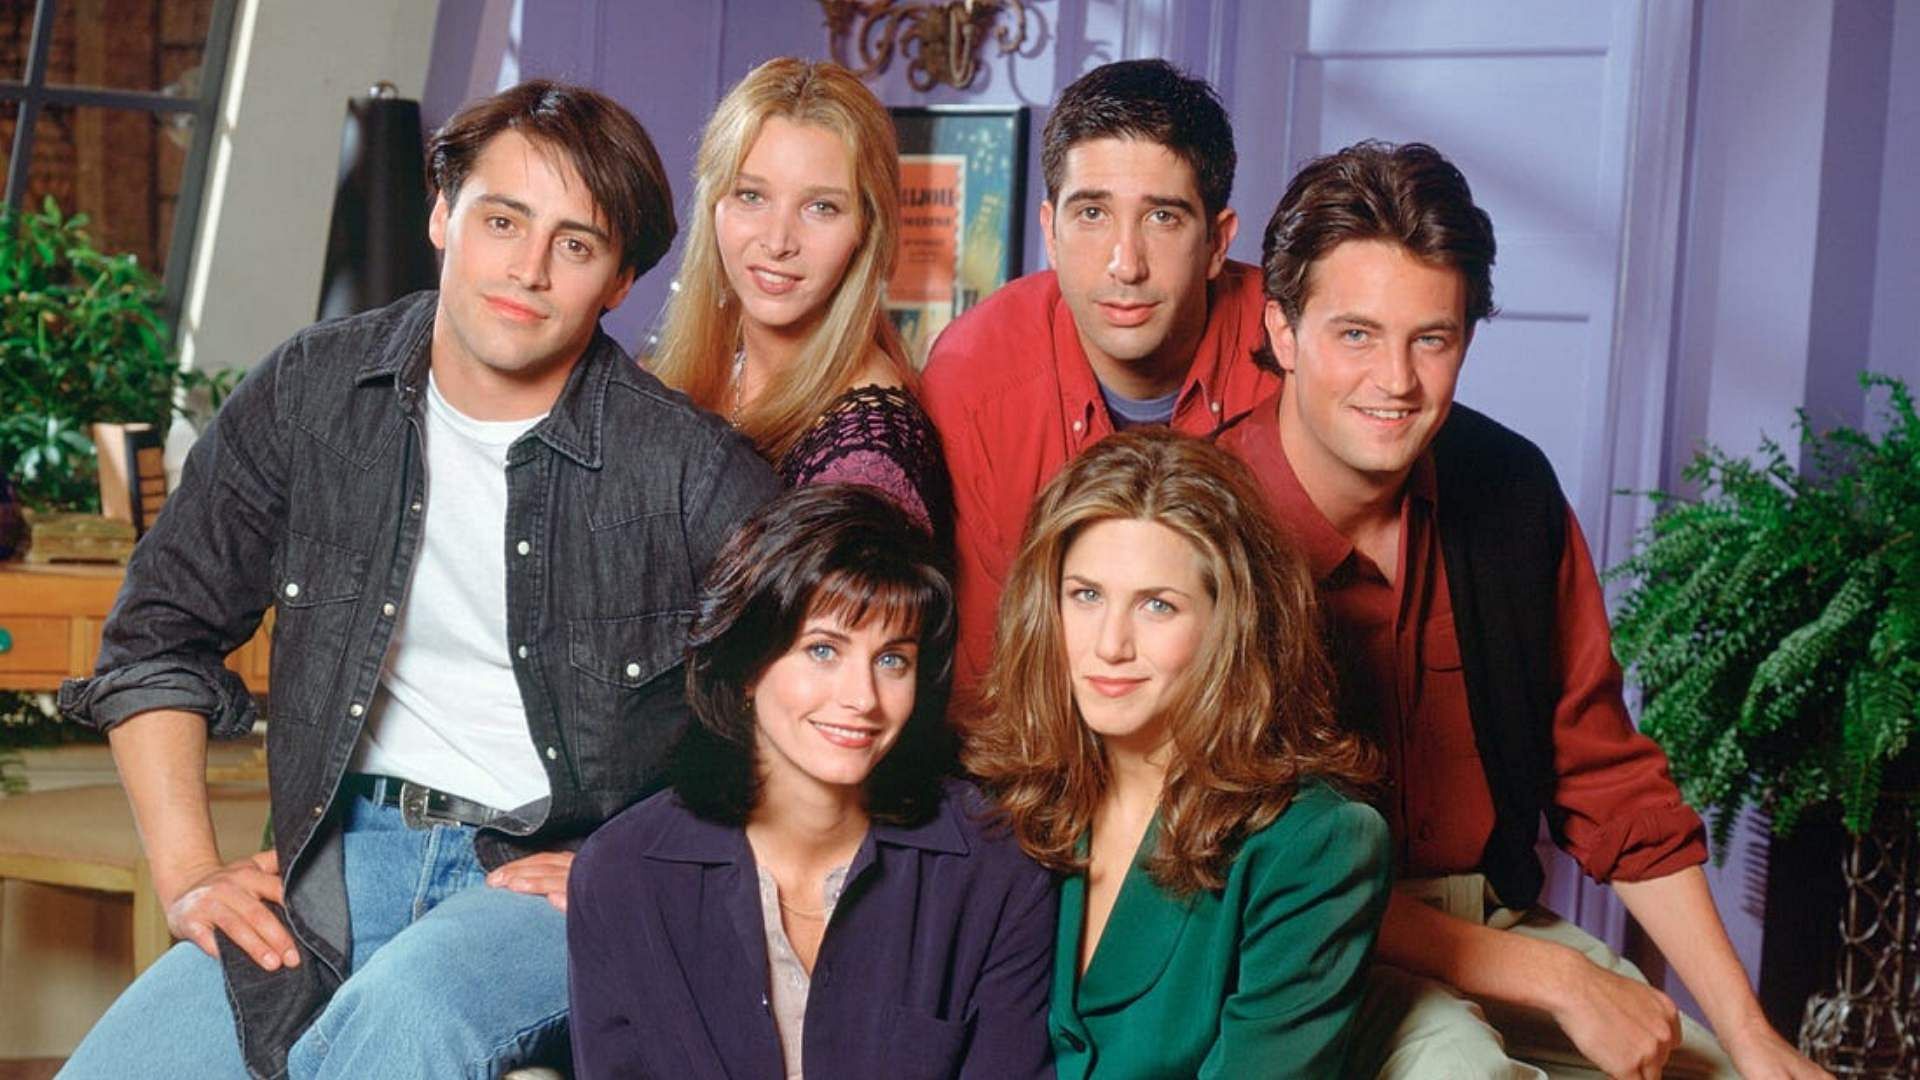 The <i>Friends </i>cast will reunite for an unscripted special on HBO Max.